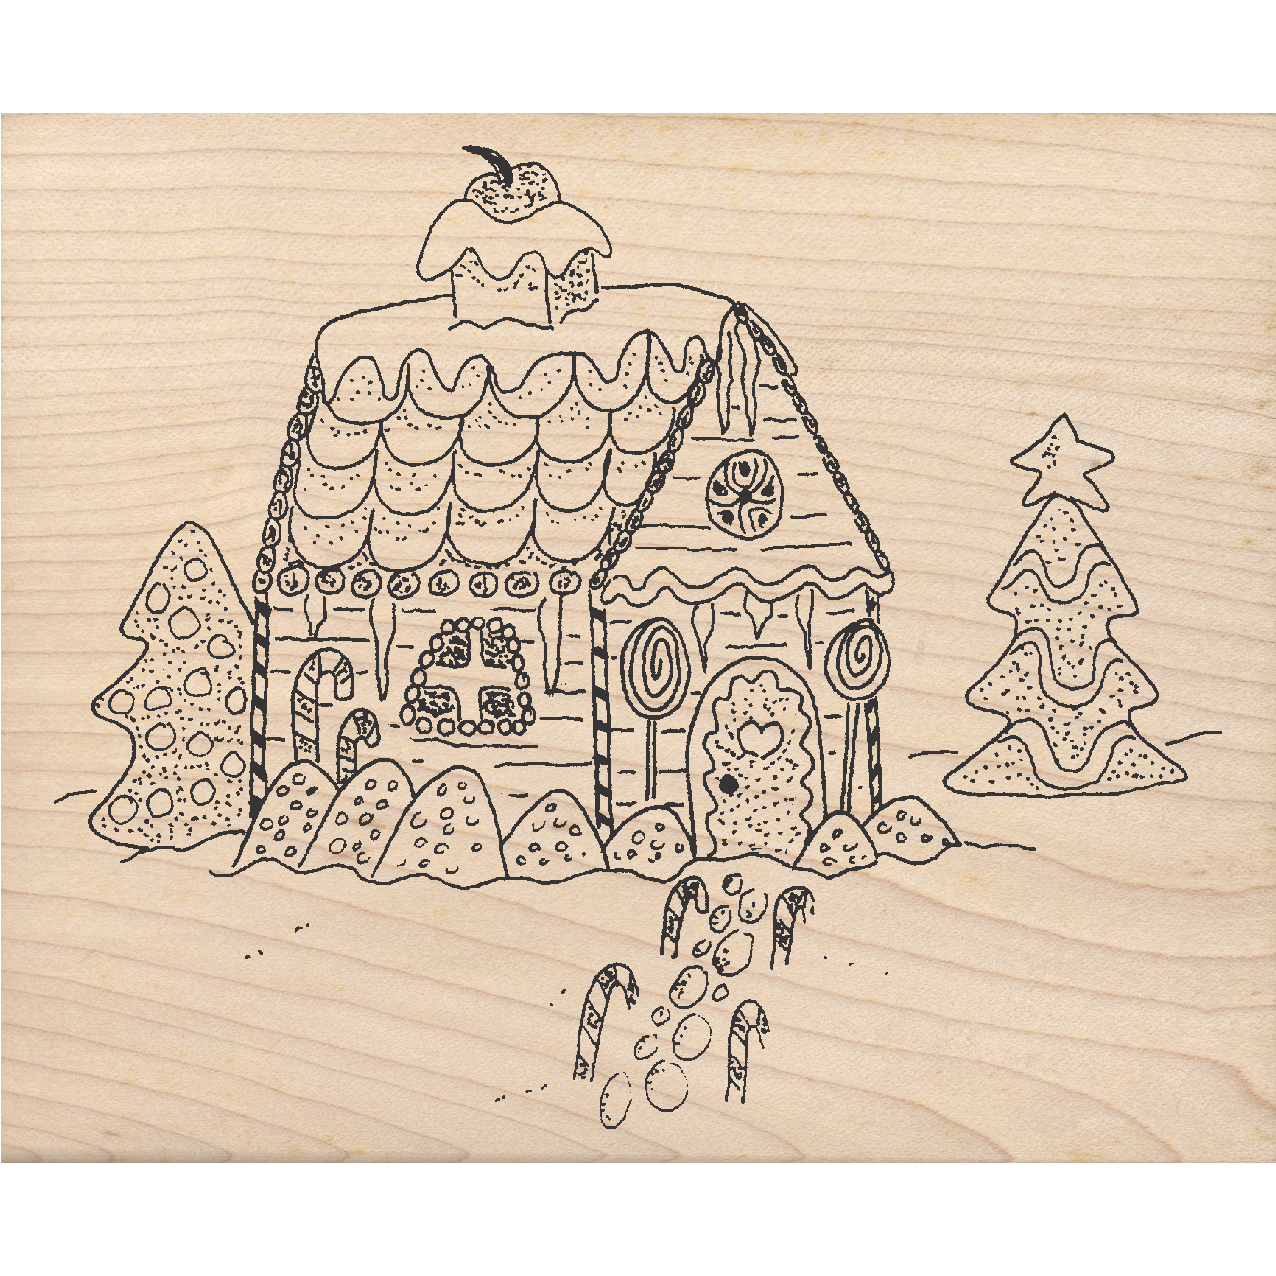 Ginger Bread House Rubber Stamp 3.5" x 4.25" block